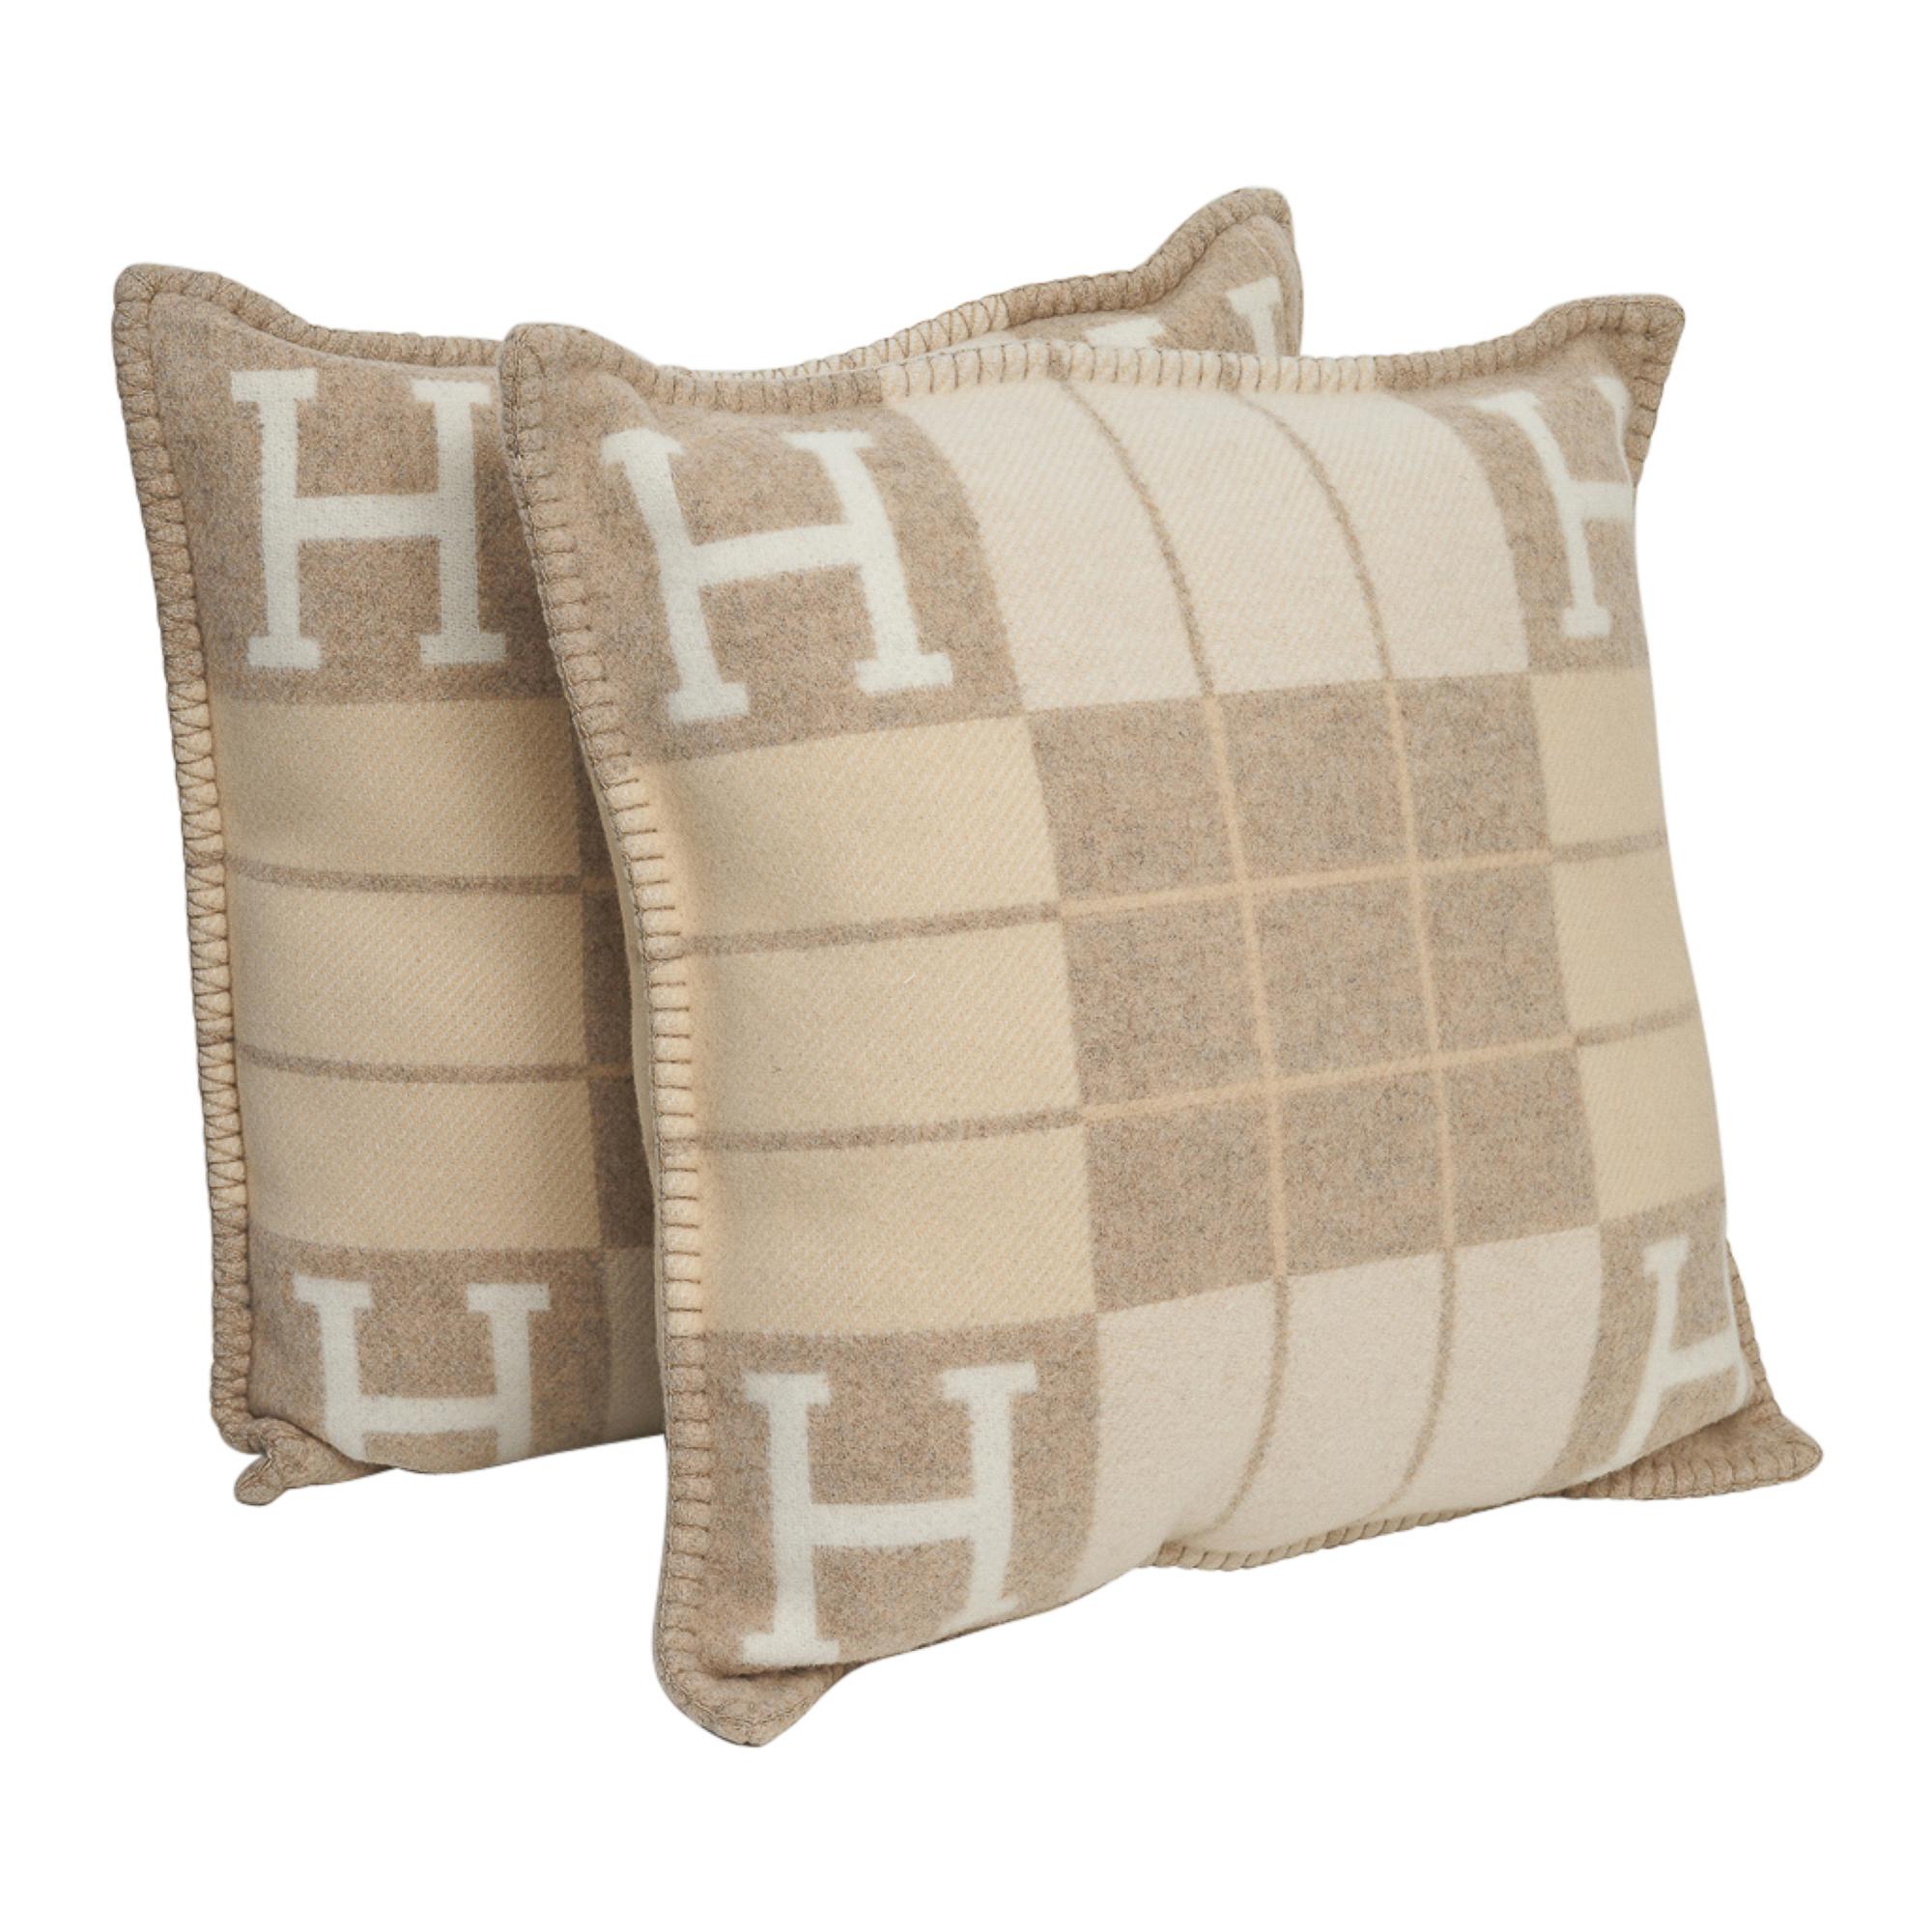 Hermes Cushion Avalon III PM H Coco and Camomille Throw Pillow Set of Two 2